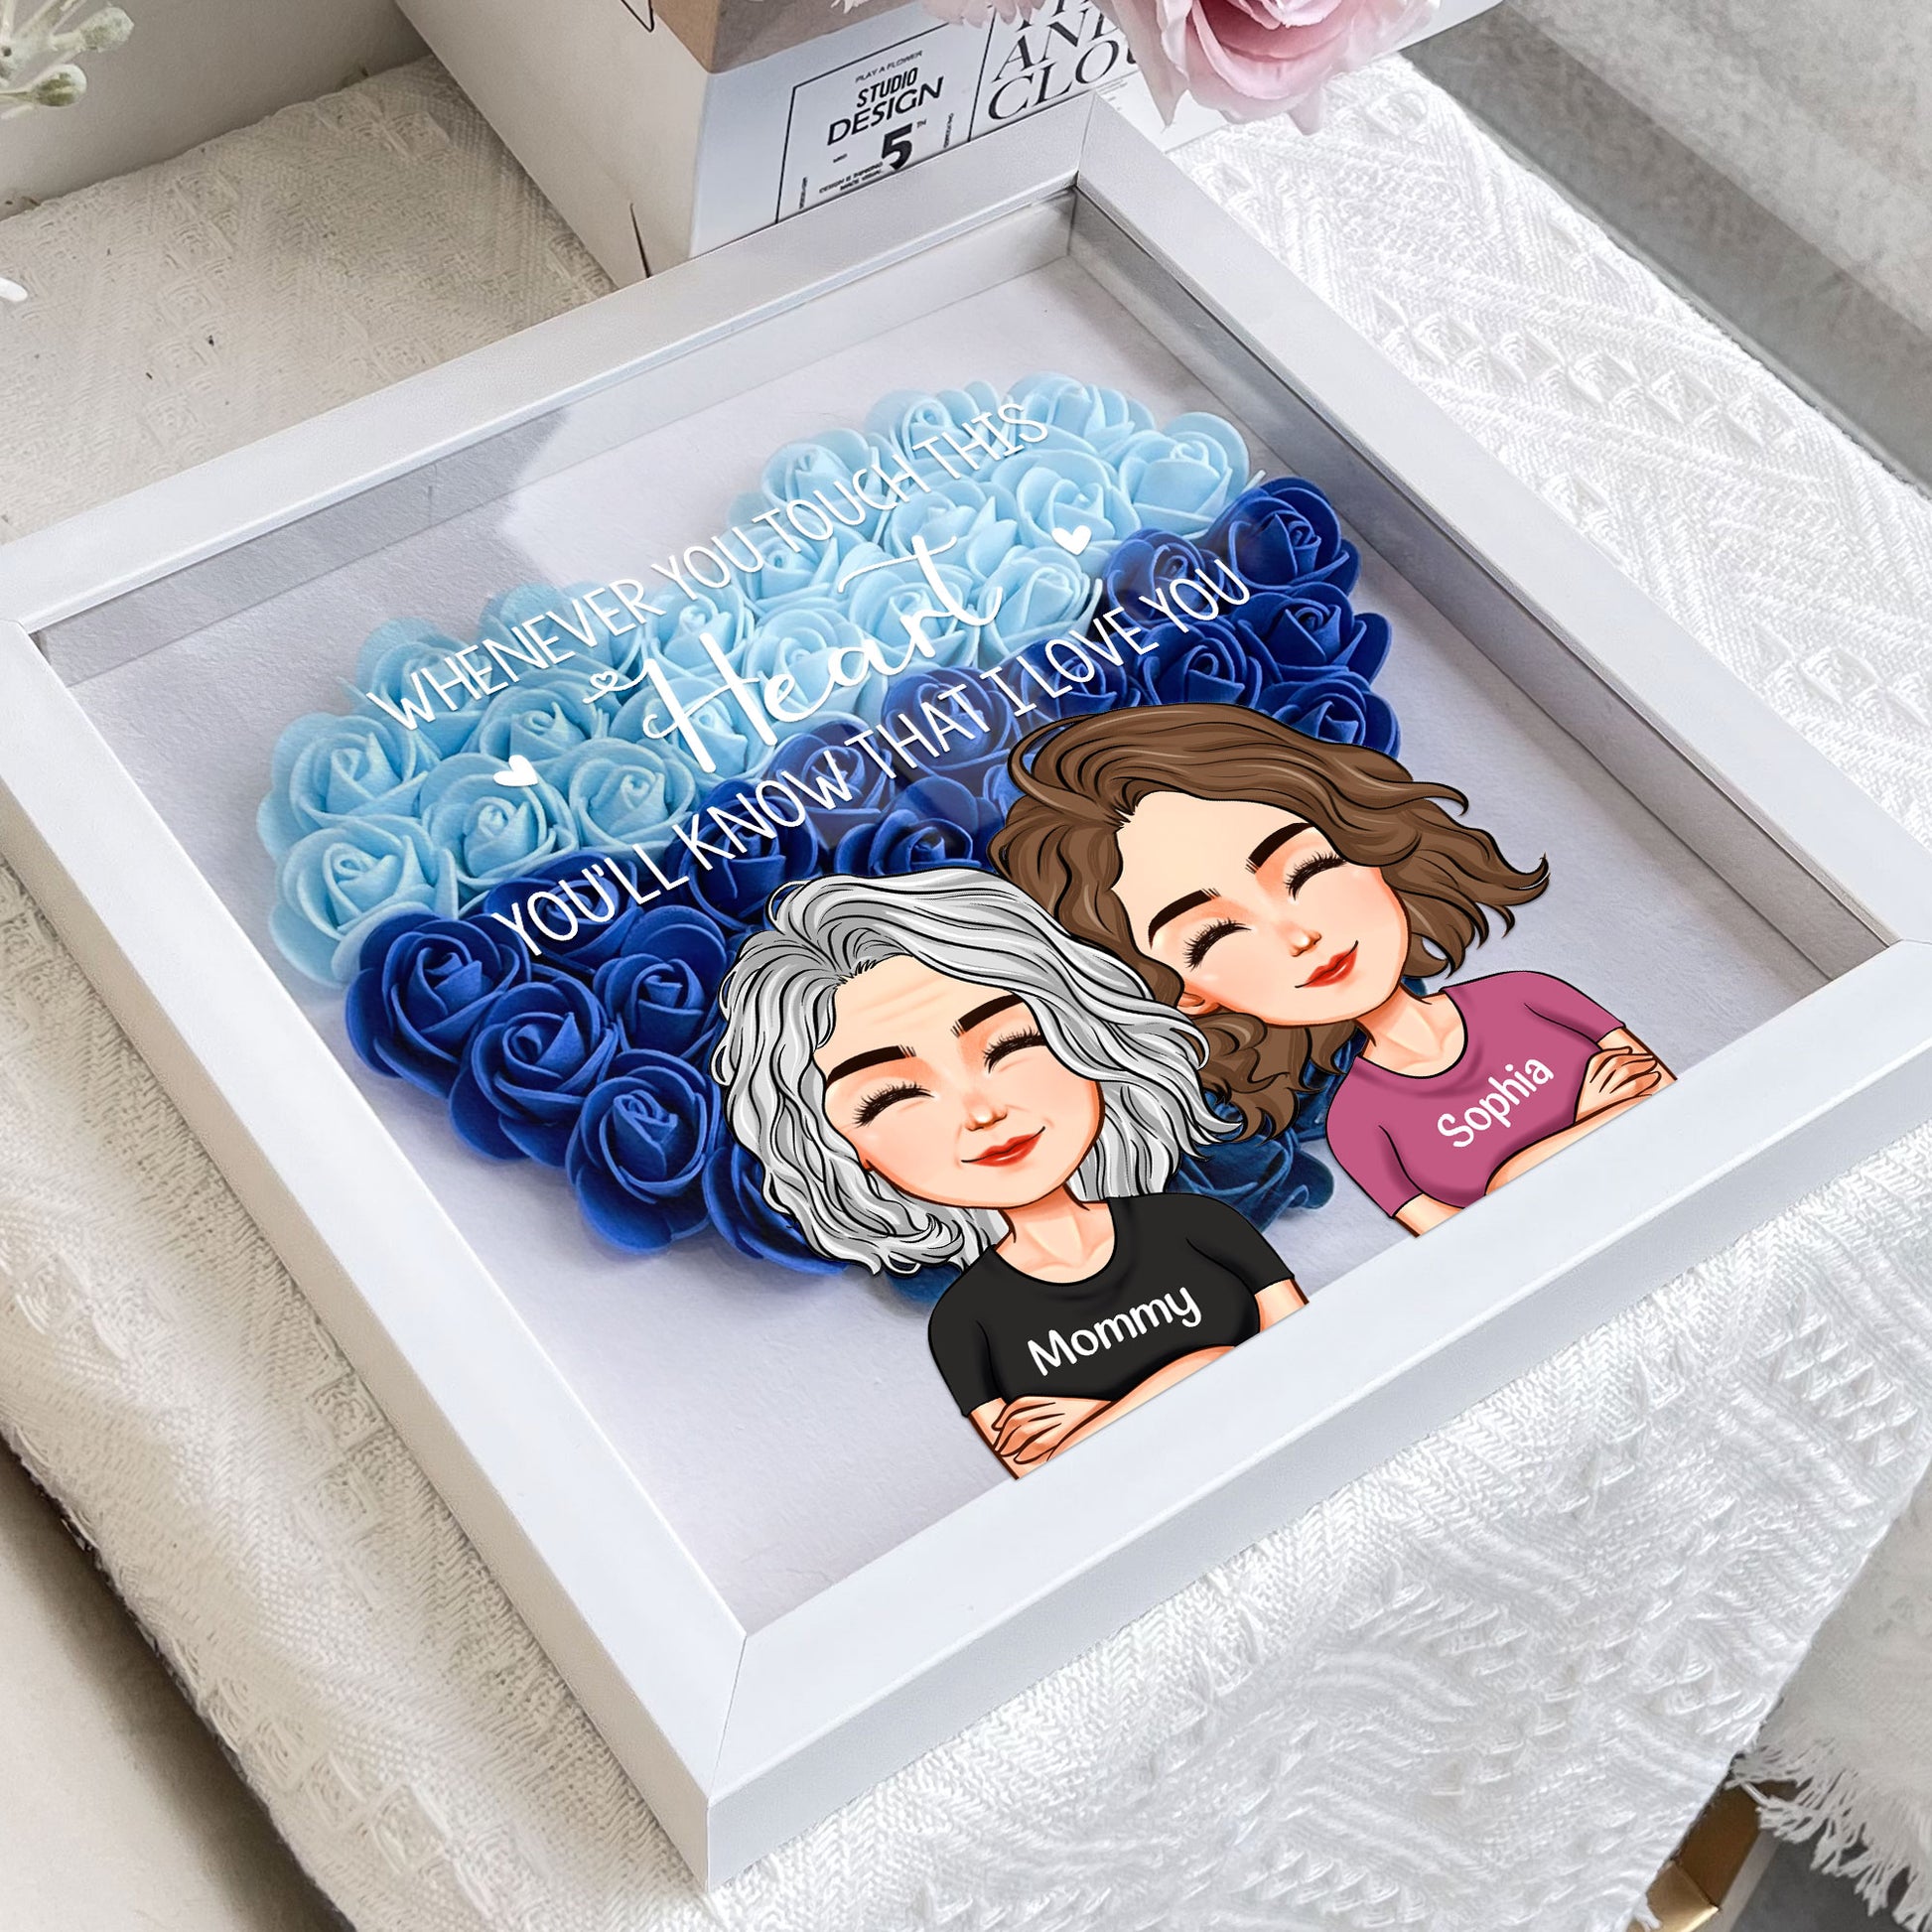 Whenever You Touch This Heart - Personalized Flower Shadow Box